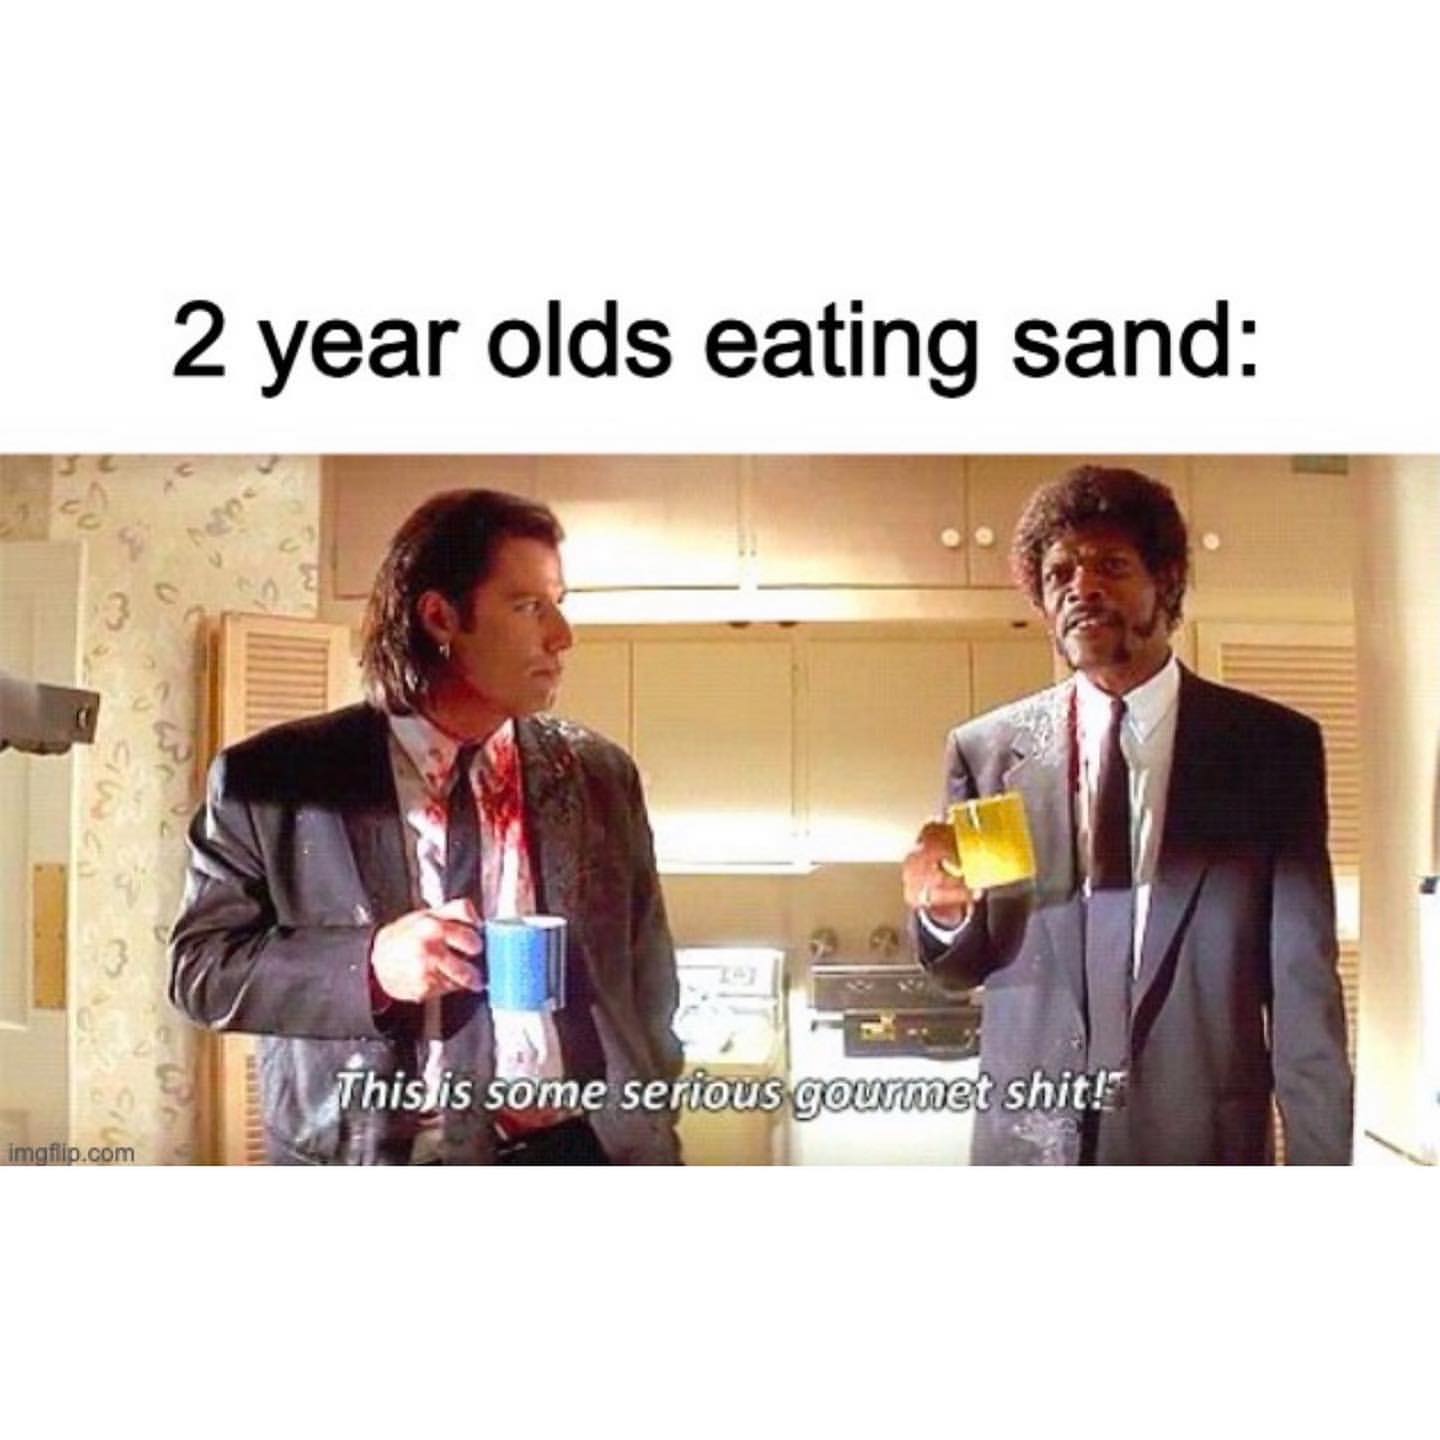 2 year olds eating sand: This is some serious gourmet shit!